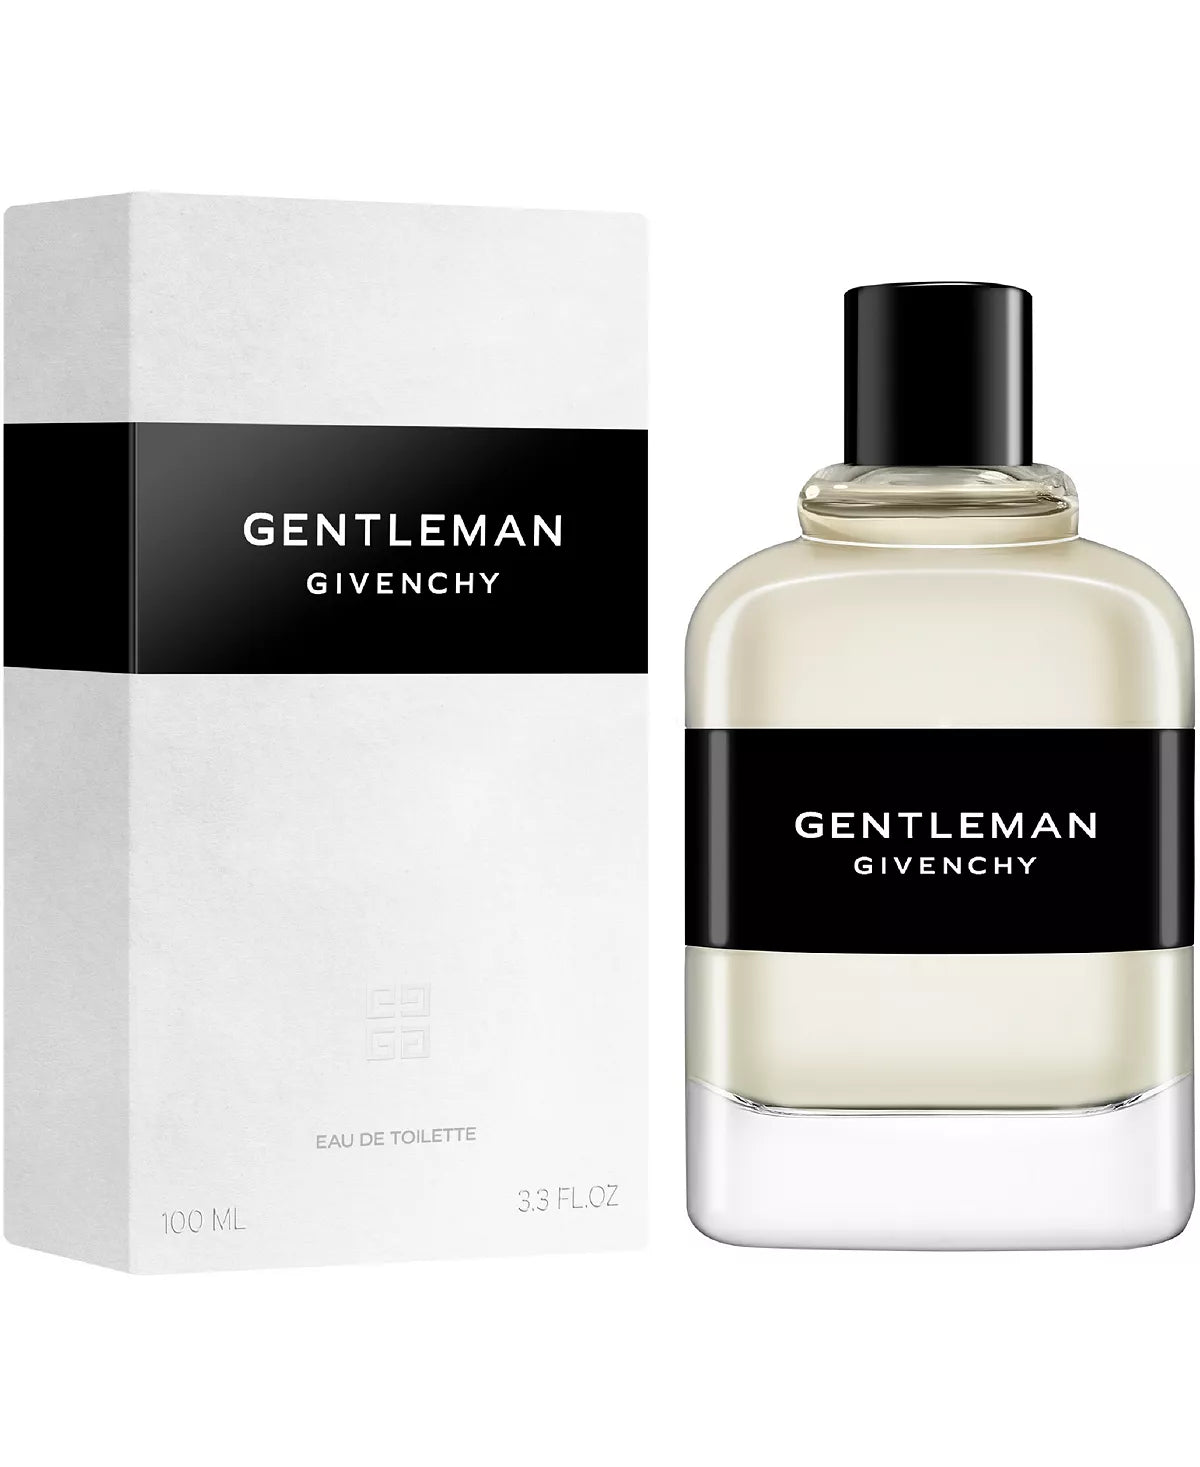 Gentleman by Givenchy 3.3 oz EDT Spray for Men